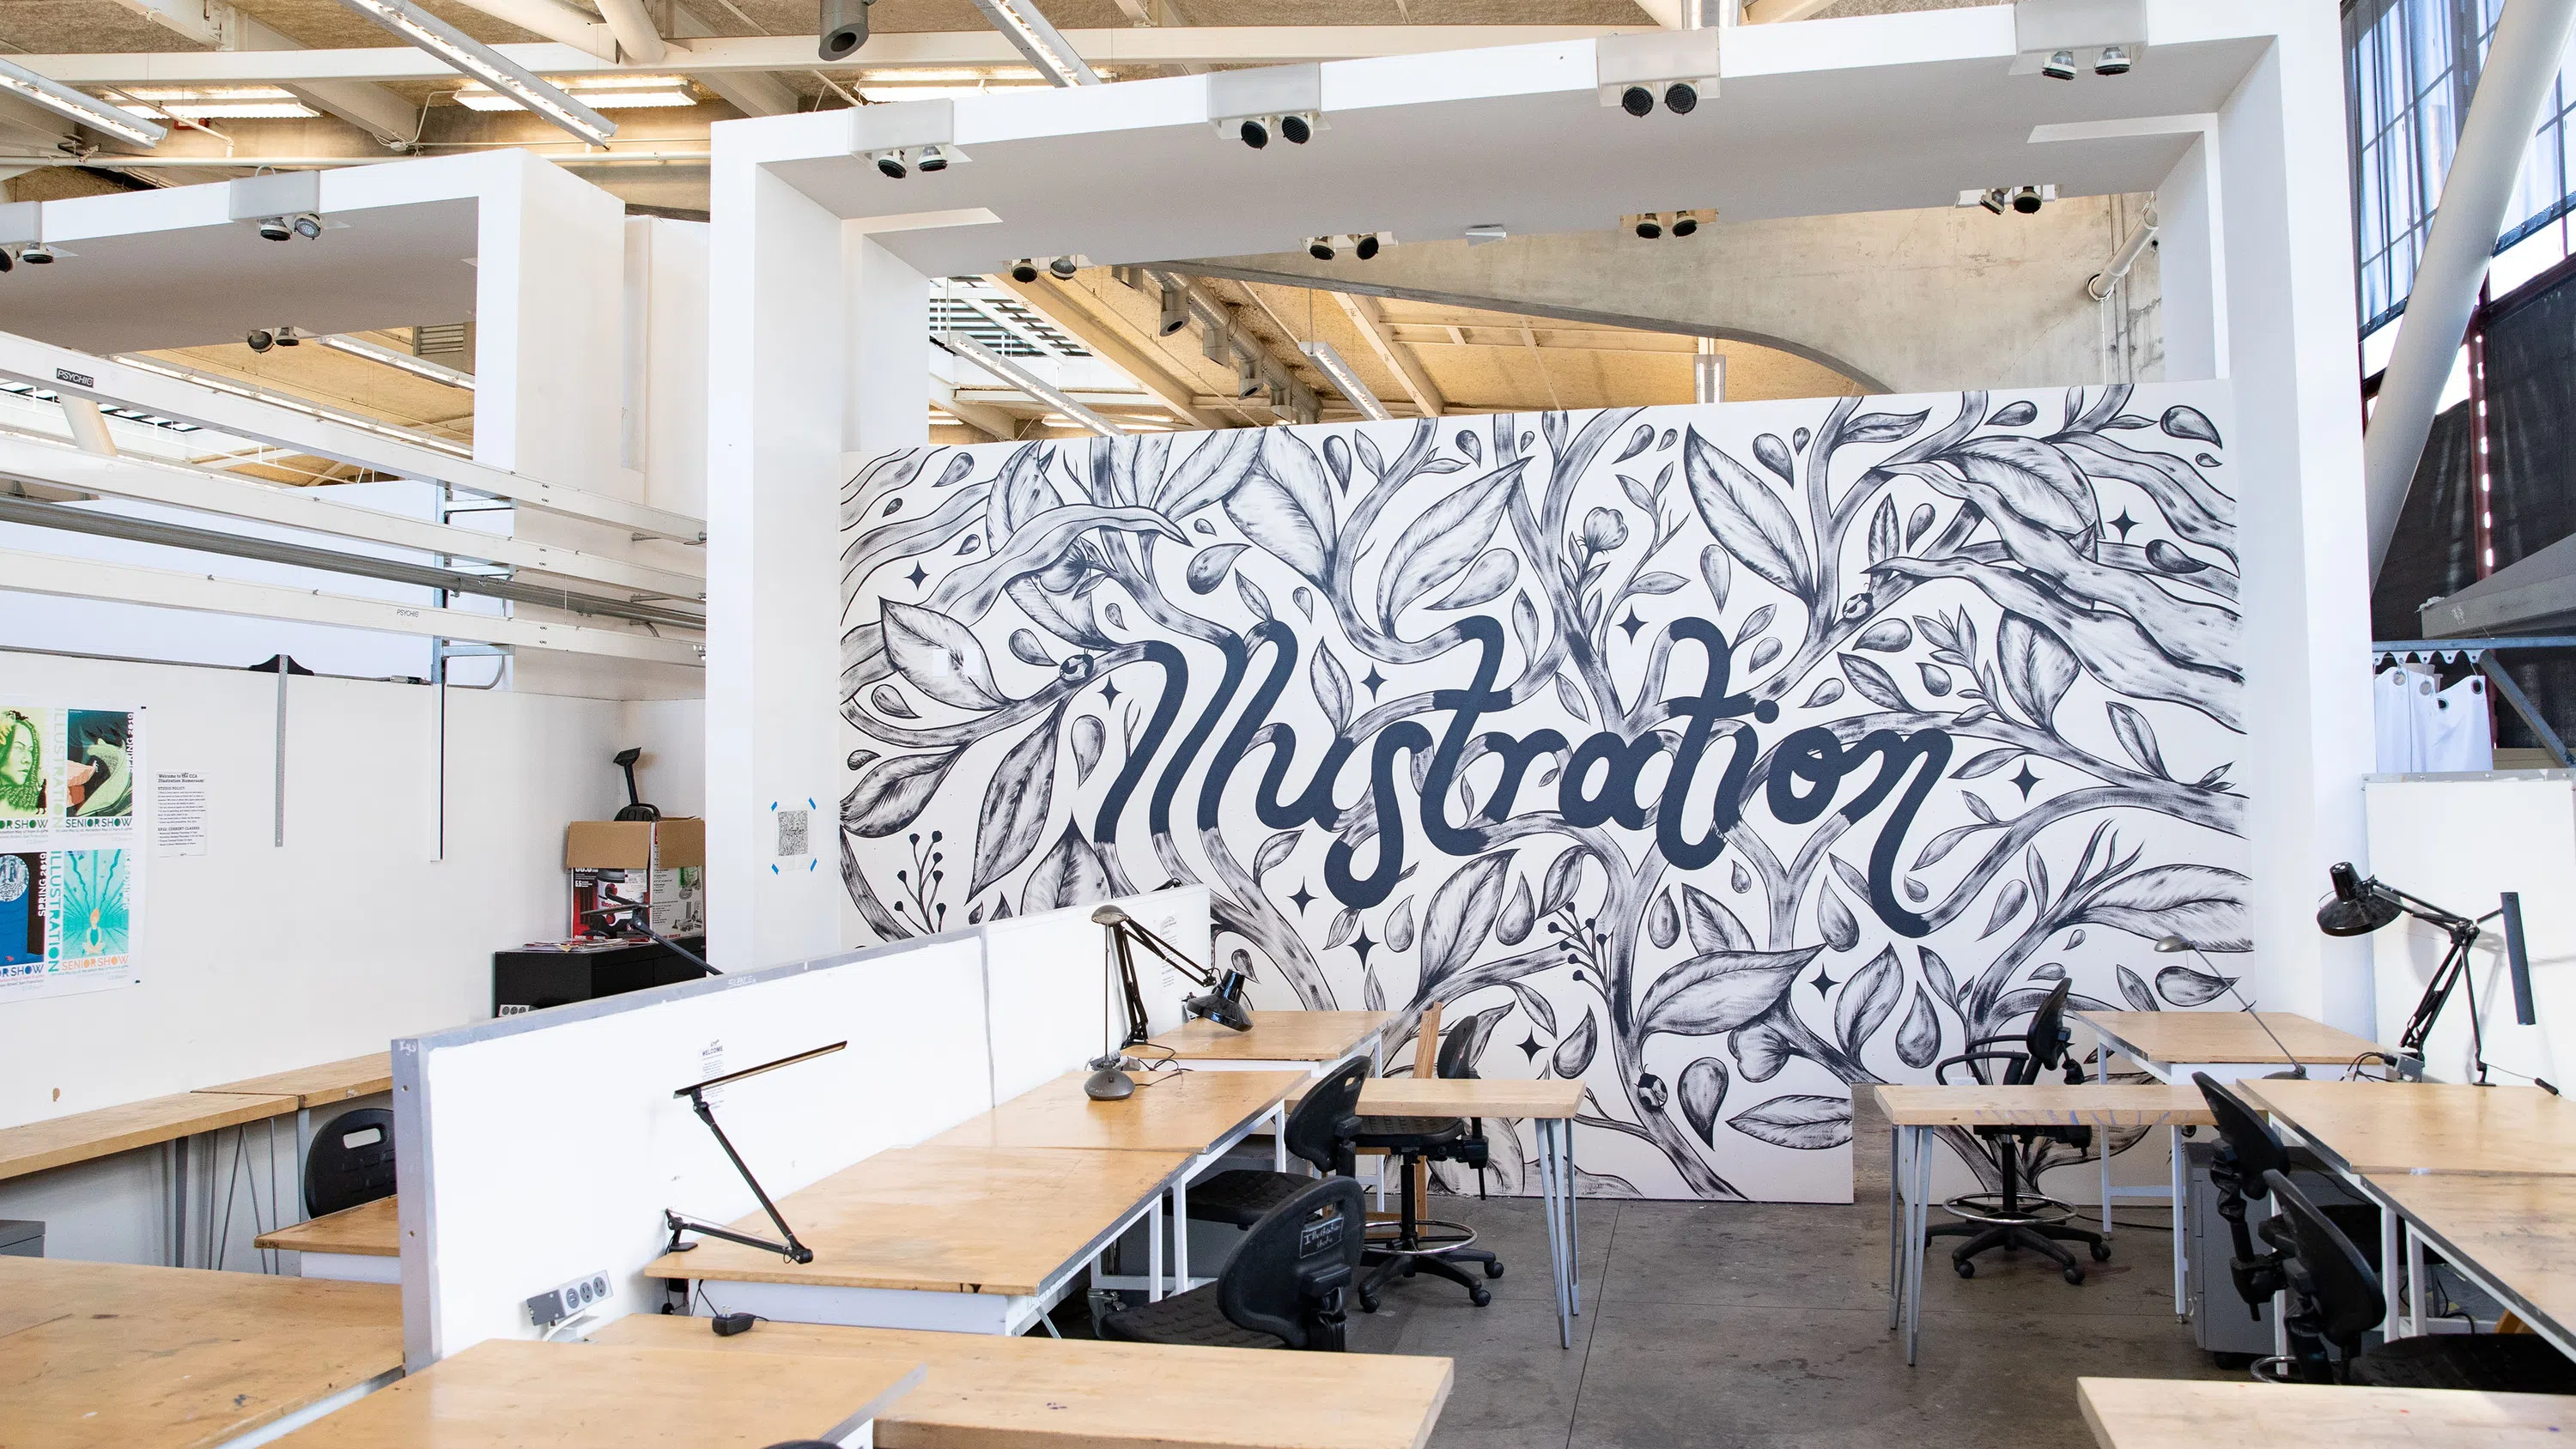 A black-and-white mural of branches and leaves reveal the word “Illustration” in organic cursive.